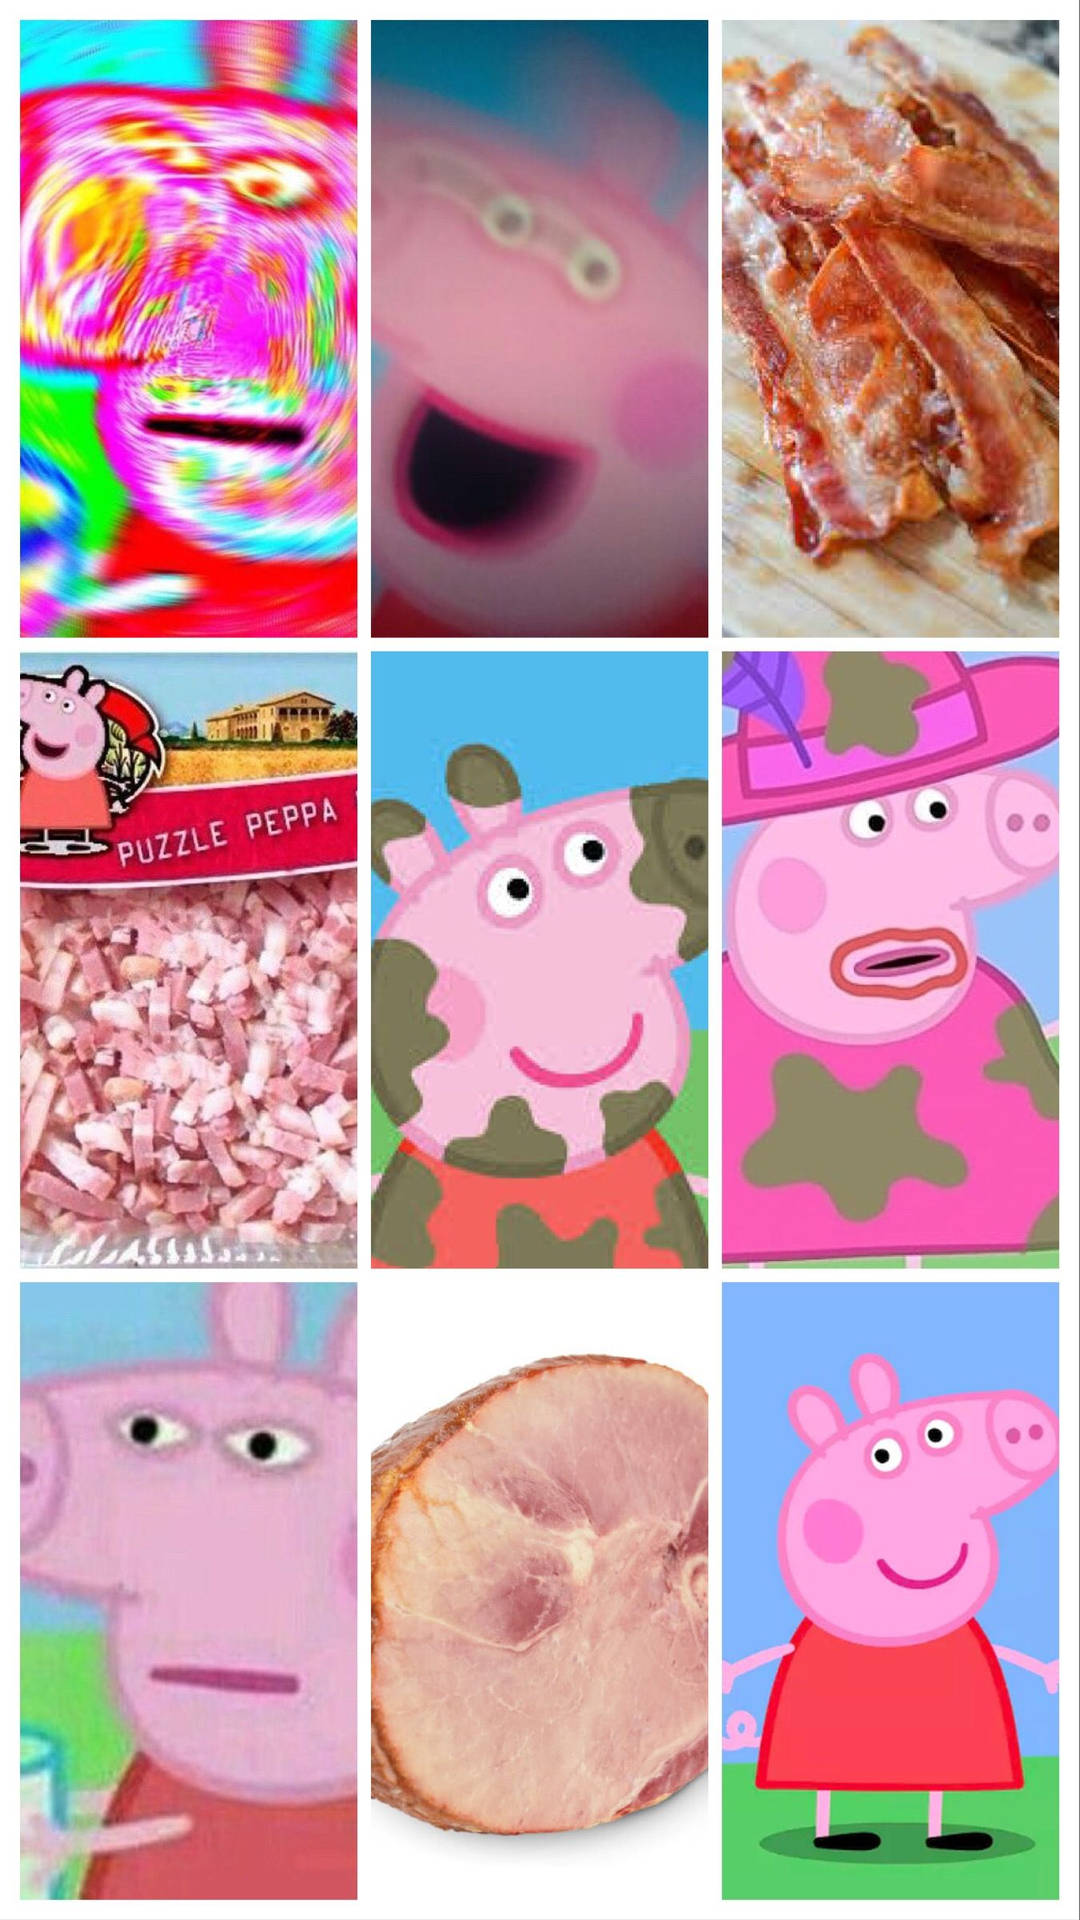 'Baddie Peppa Pig brings out her rebellious side with her pink jacket, bracers and guitar.' Wallpaper